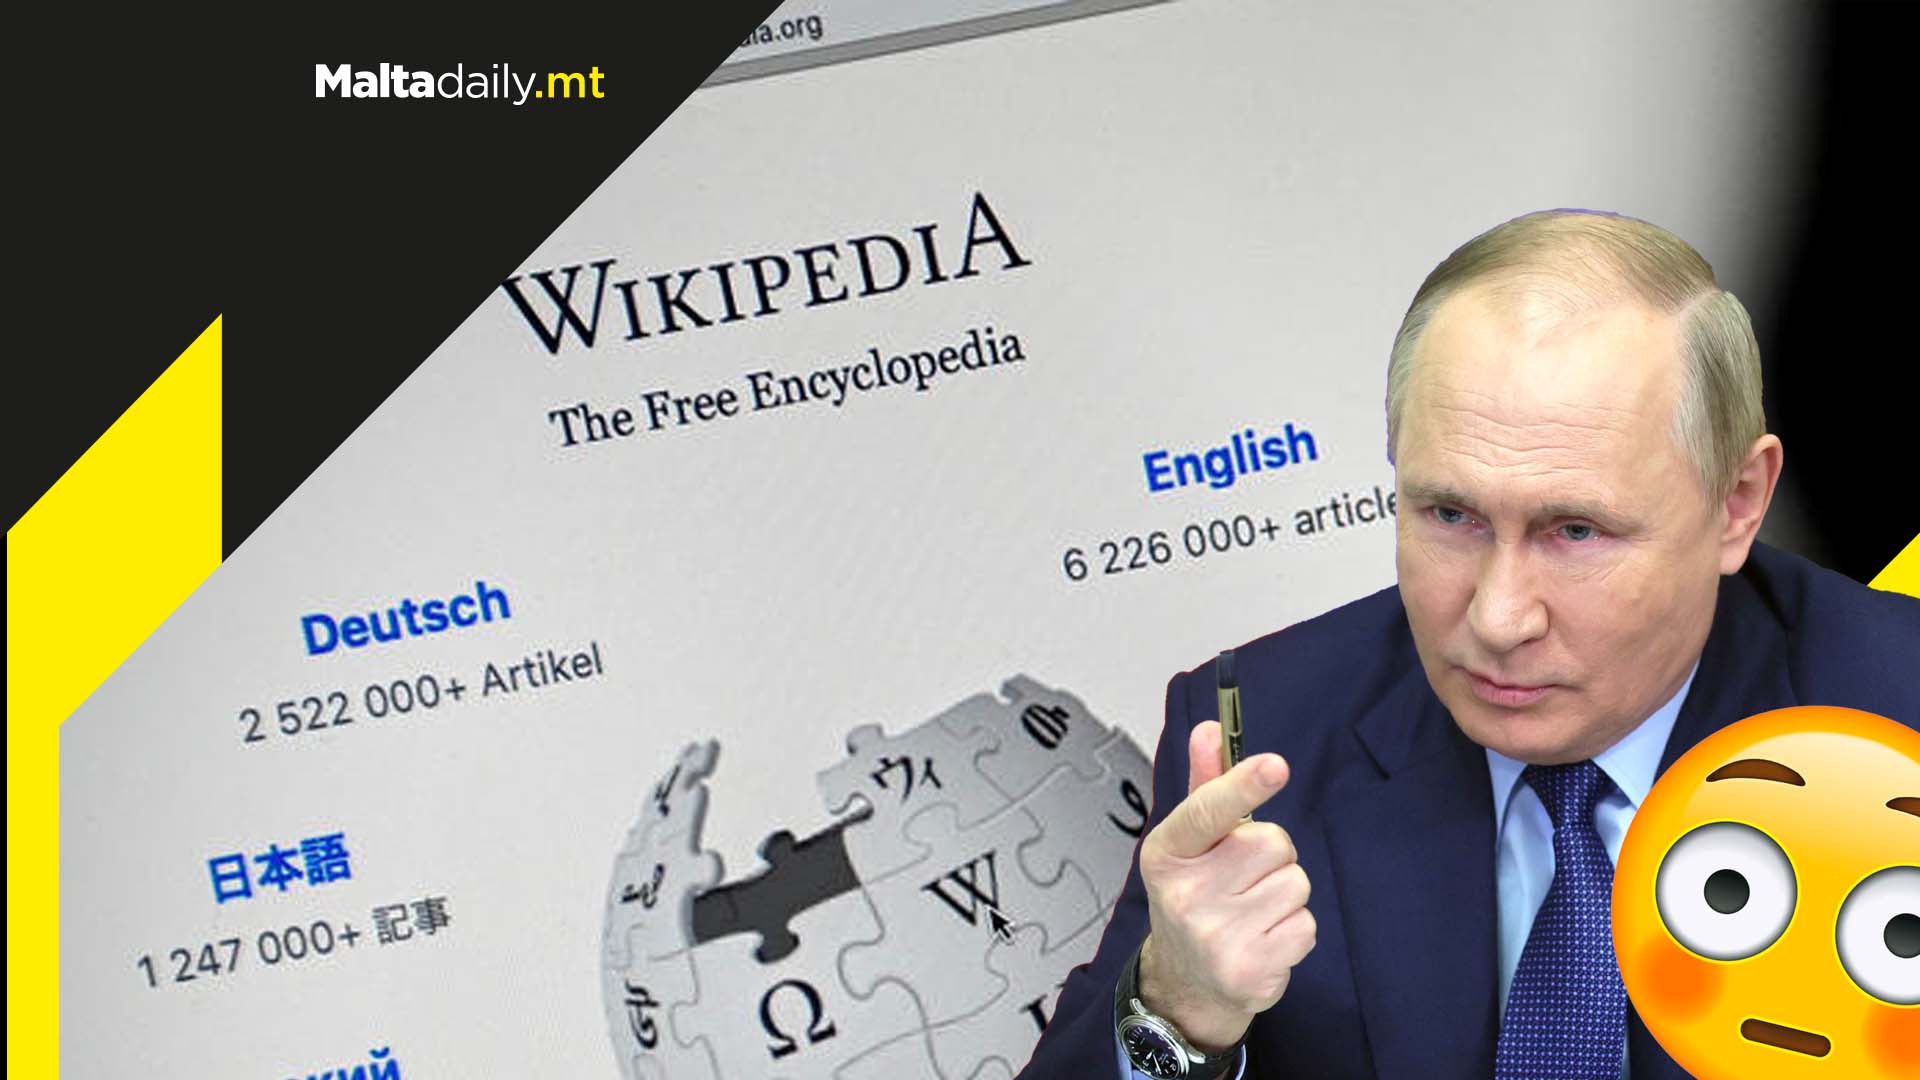 Russia threatens Wikipedia with huge fine over ‘misinformation’